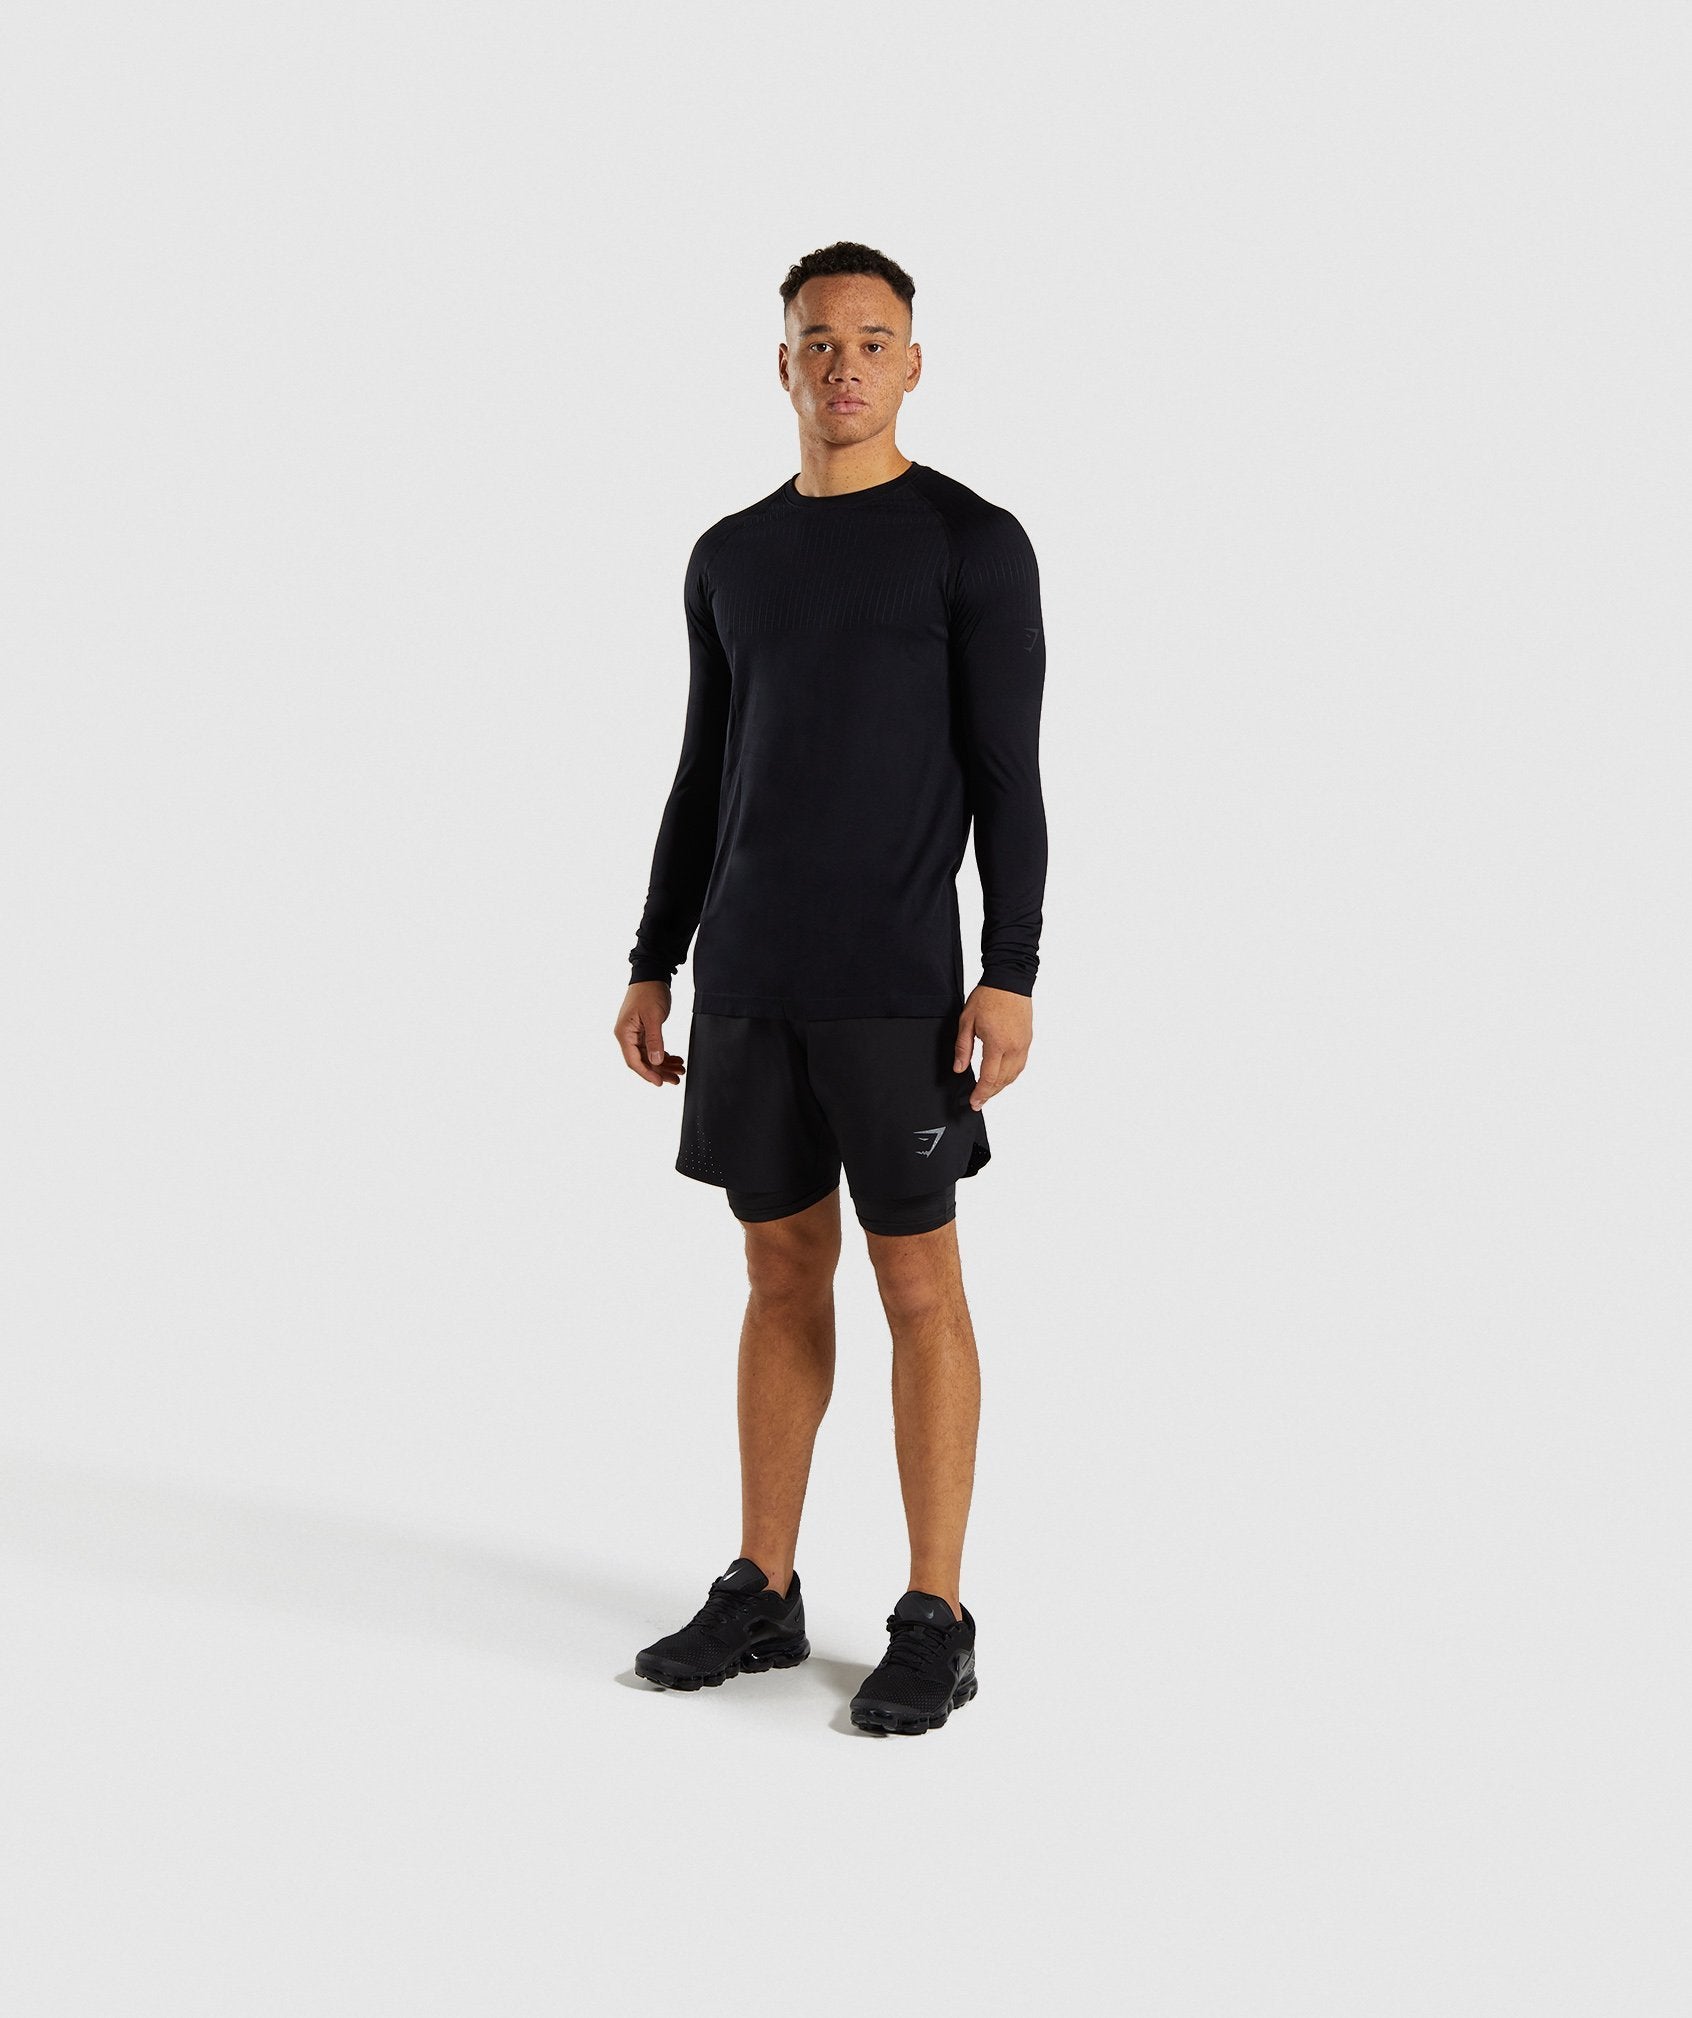 Superior Lightweight Seamless Long Sleeve T-Shirt in Black - view 3